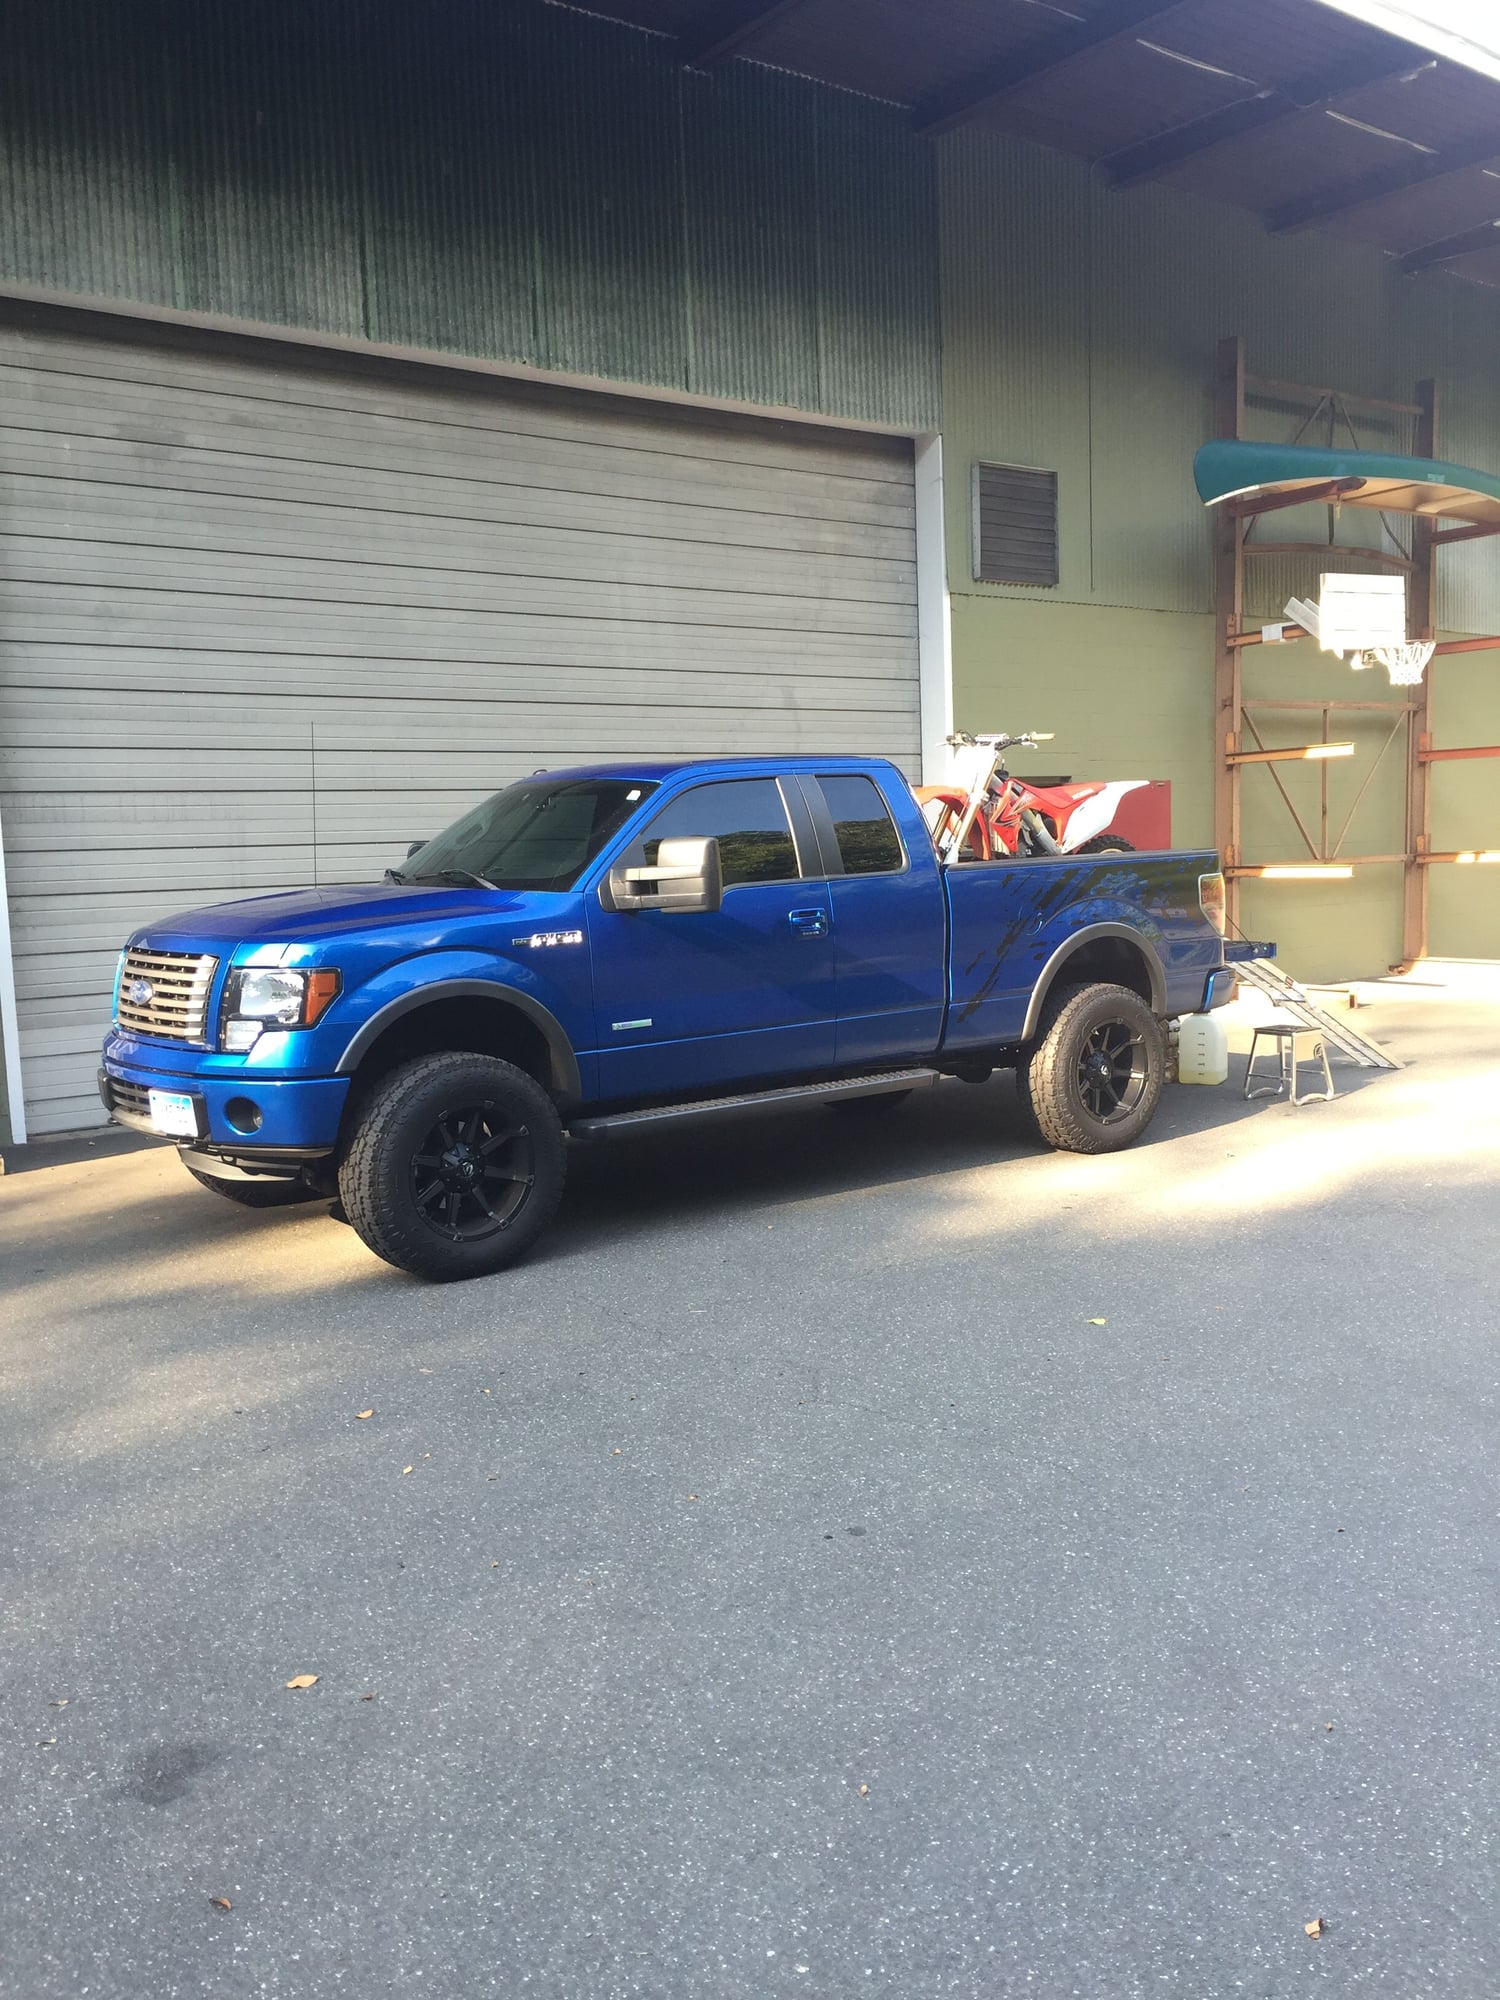 Post Your Lifted F150's - Page 45 - Ford F150 Forum ...